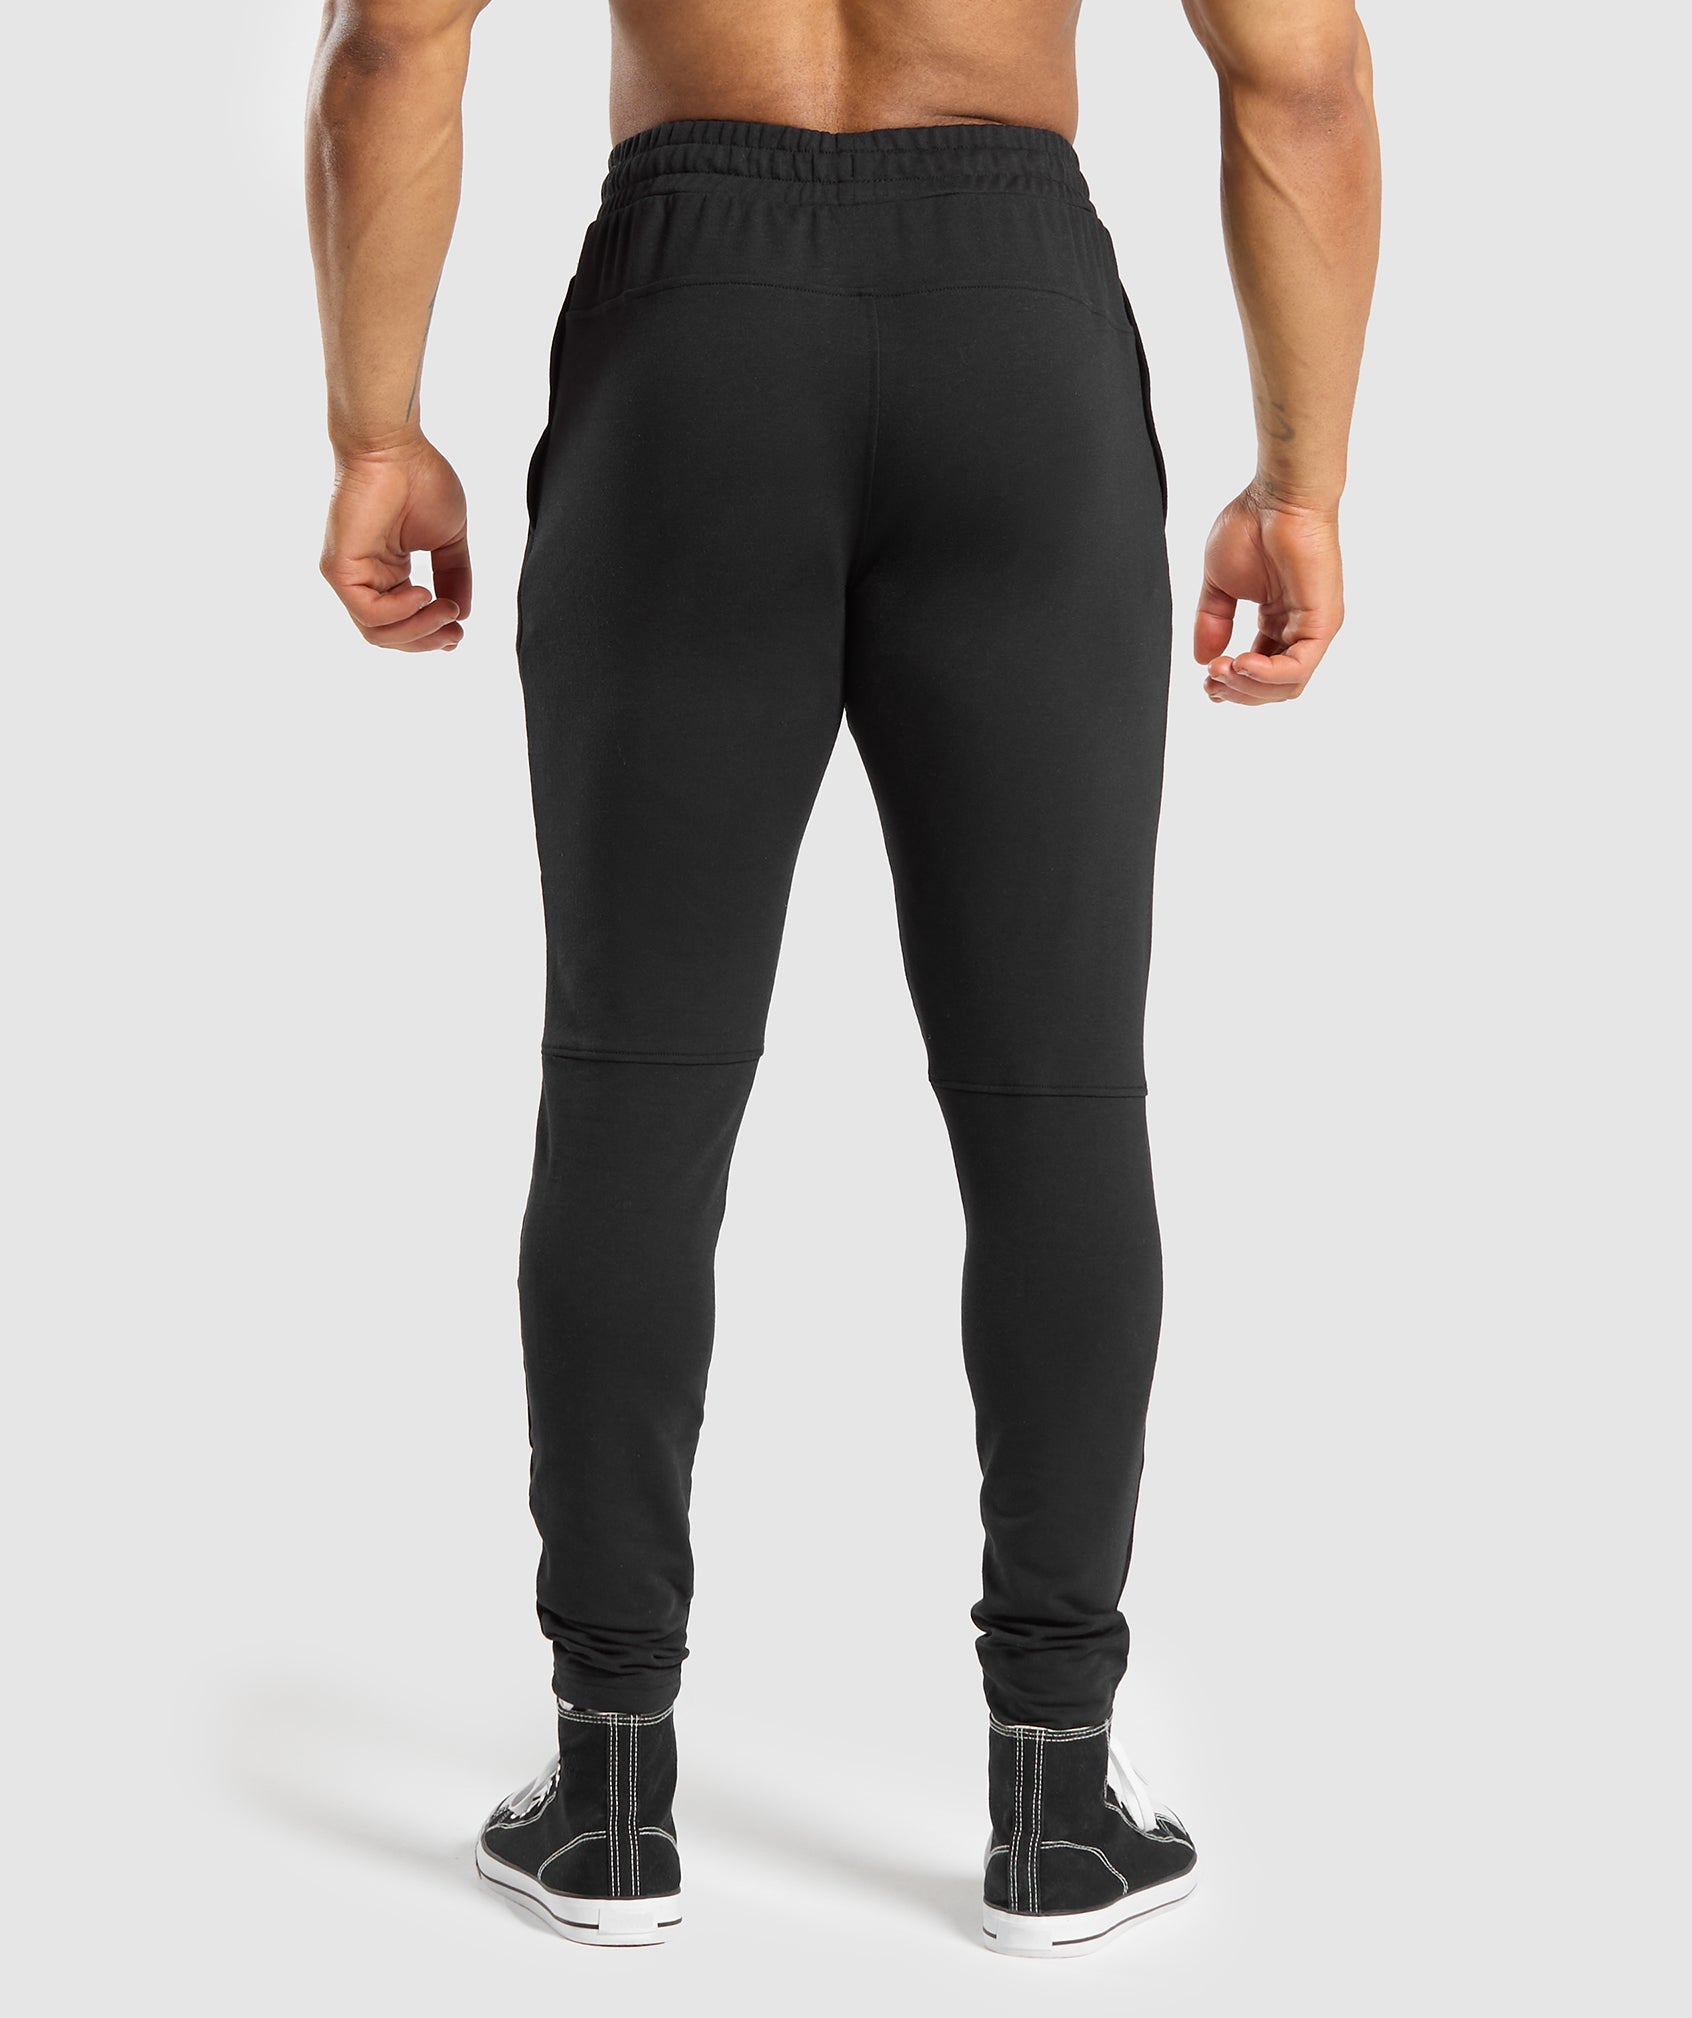 Essential Muscle Joggers in Black - view 2